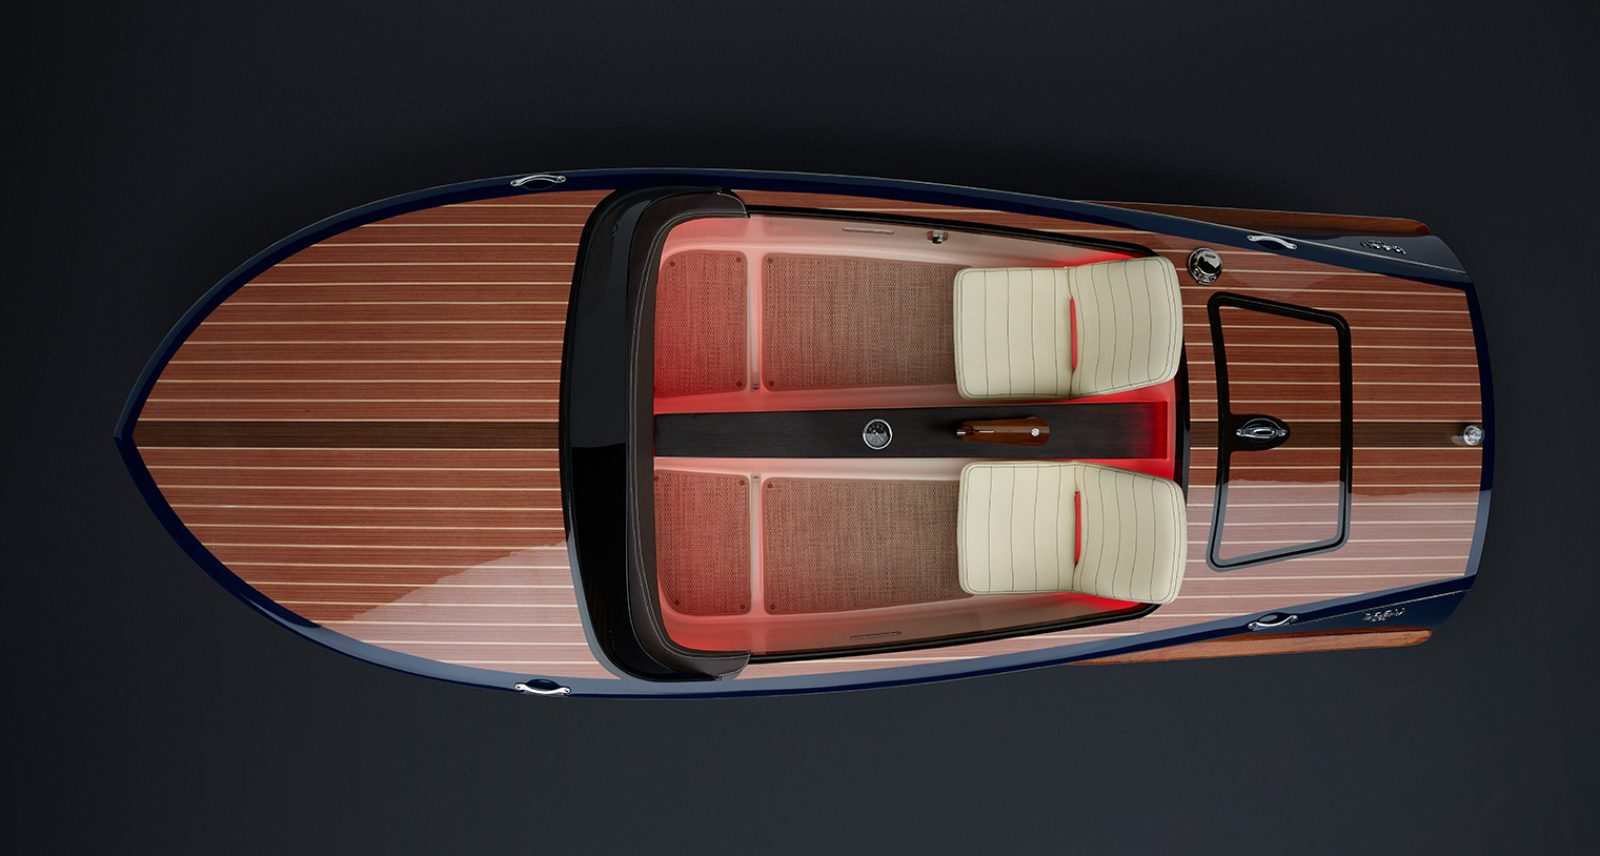 Boat Shopping Is Our New Preferred Form of Winter Escapism